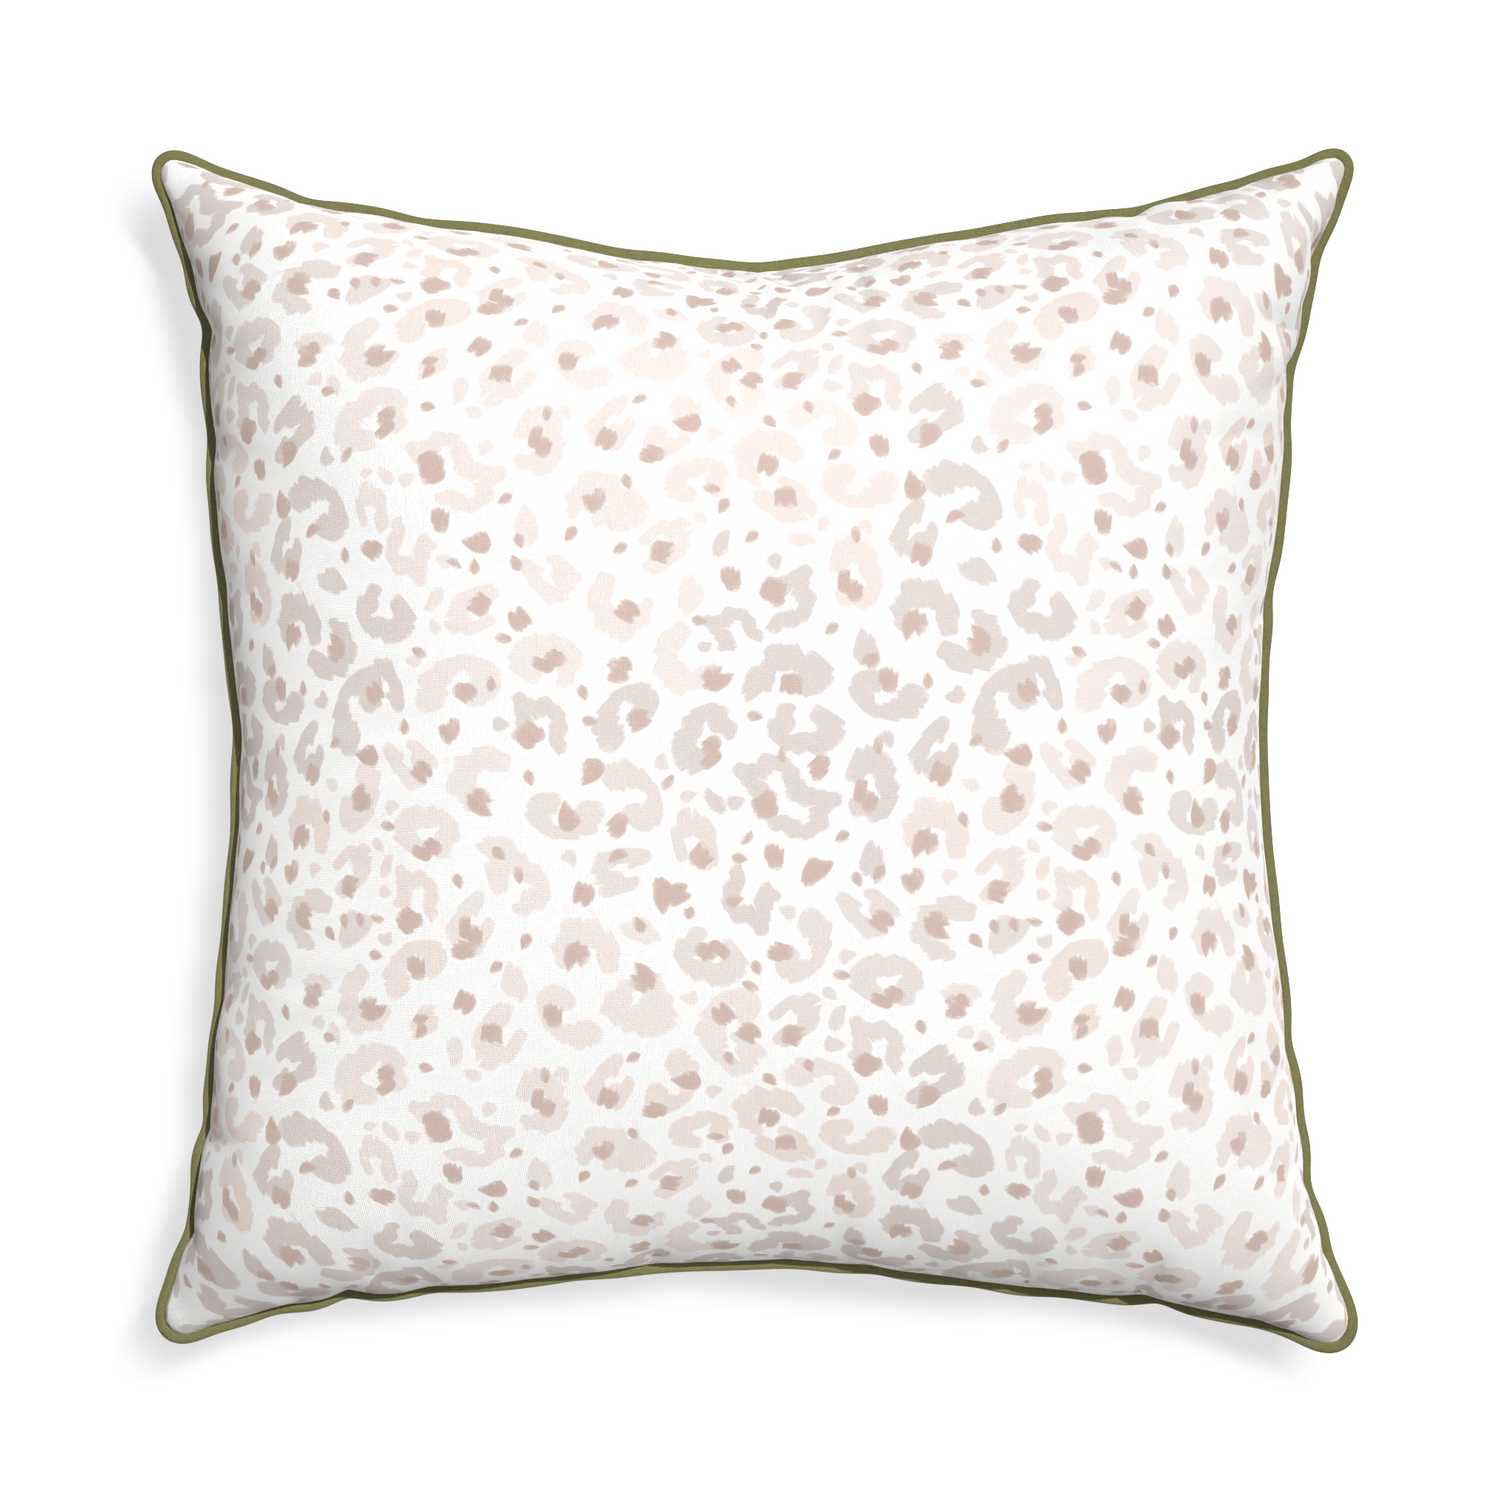 Euro-sham rosie custom pillow with moss piping on white background